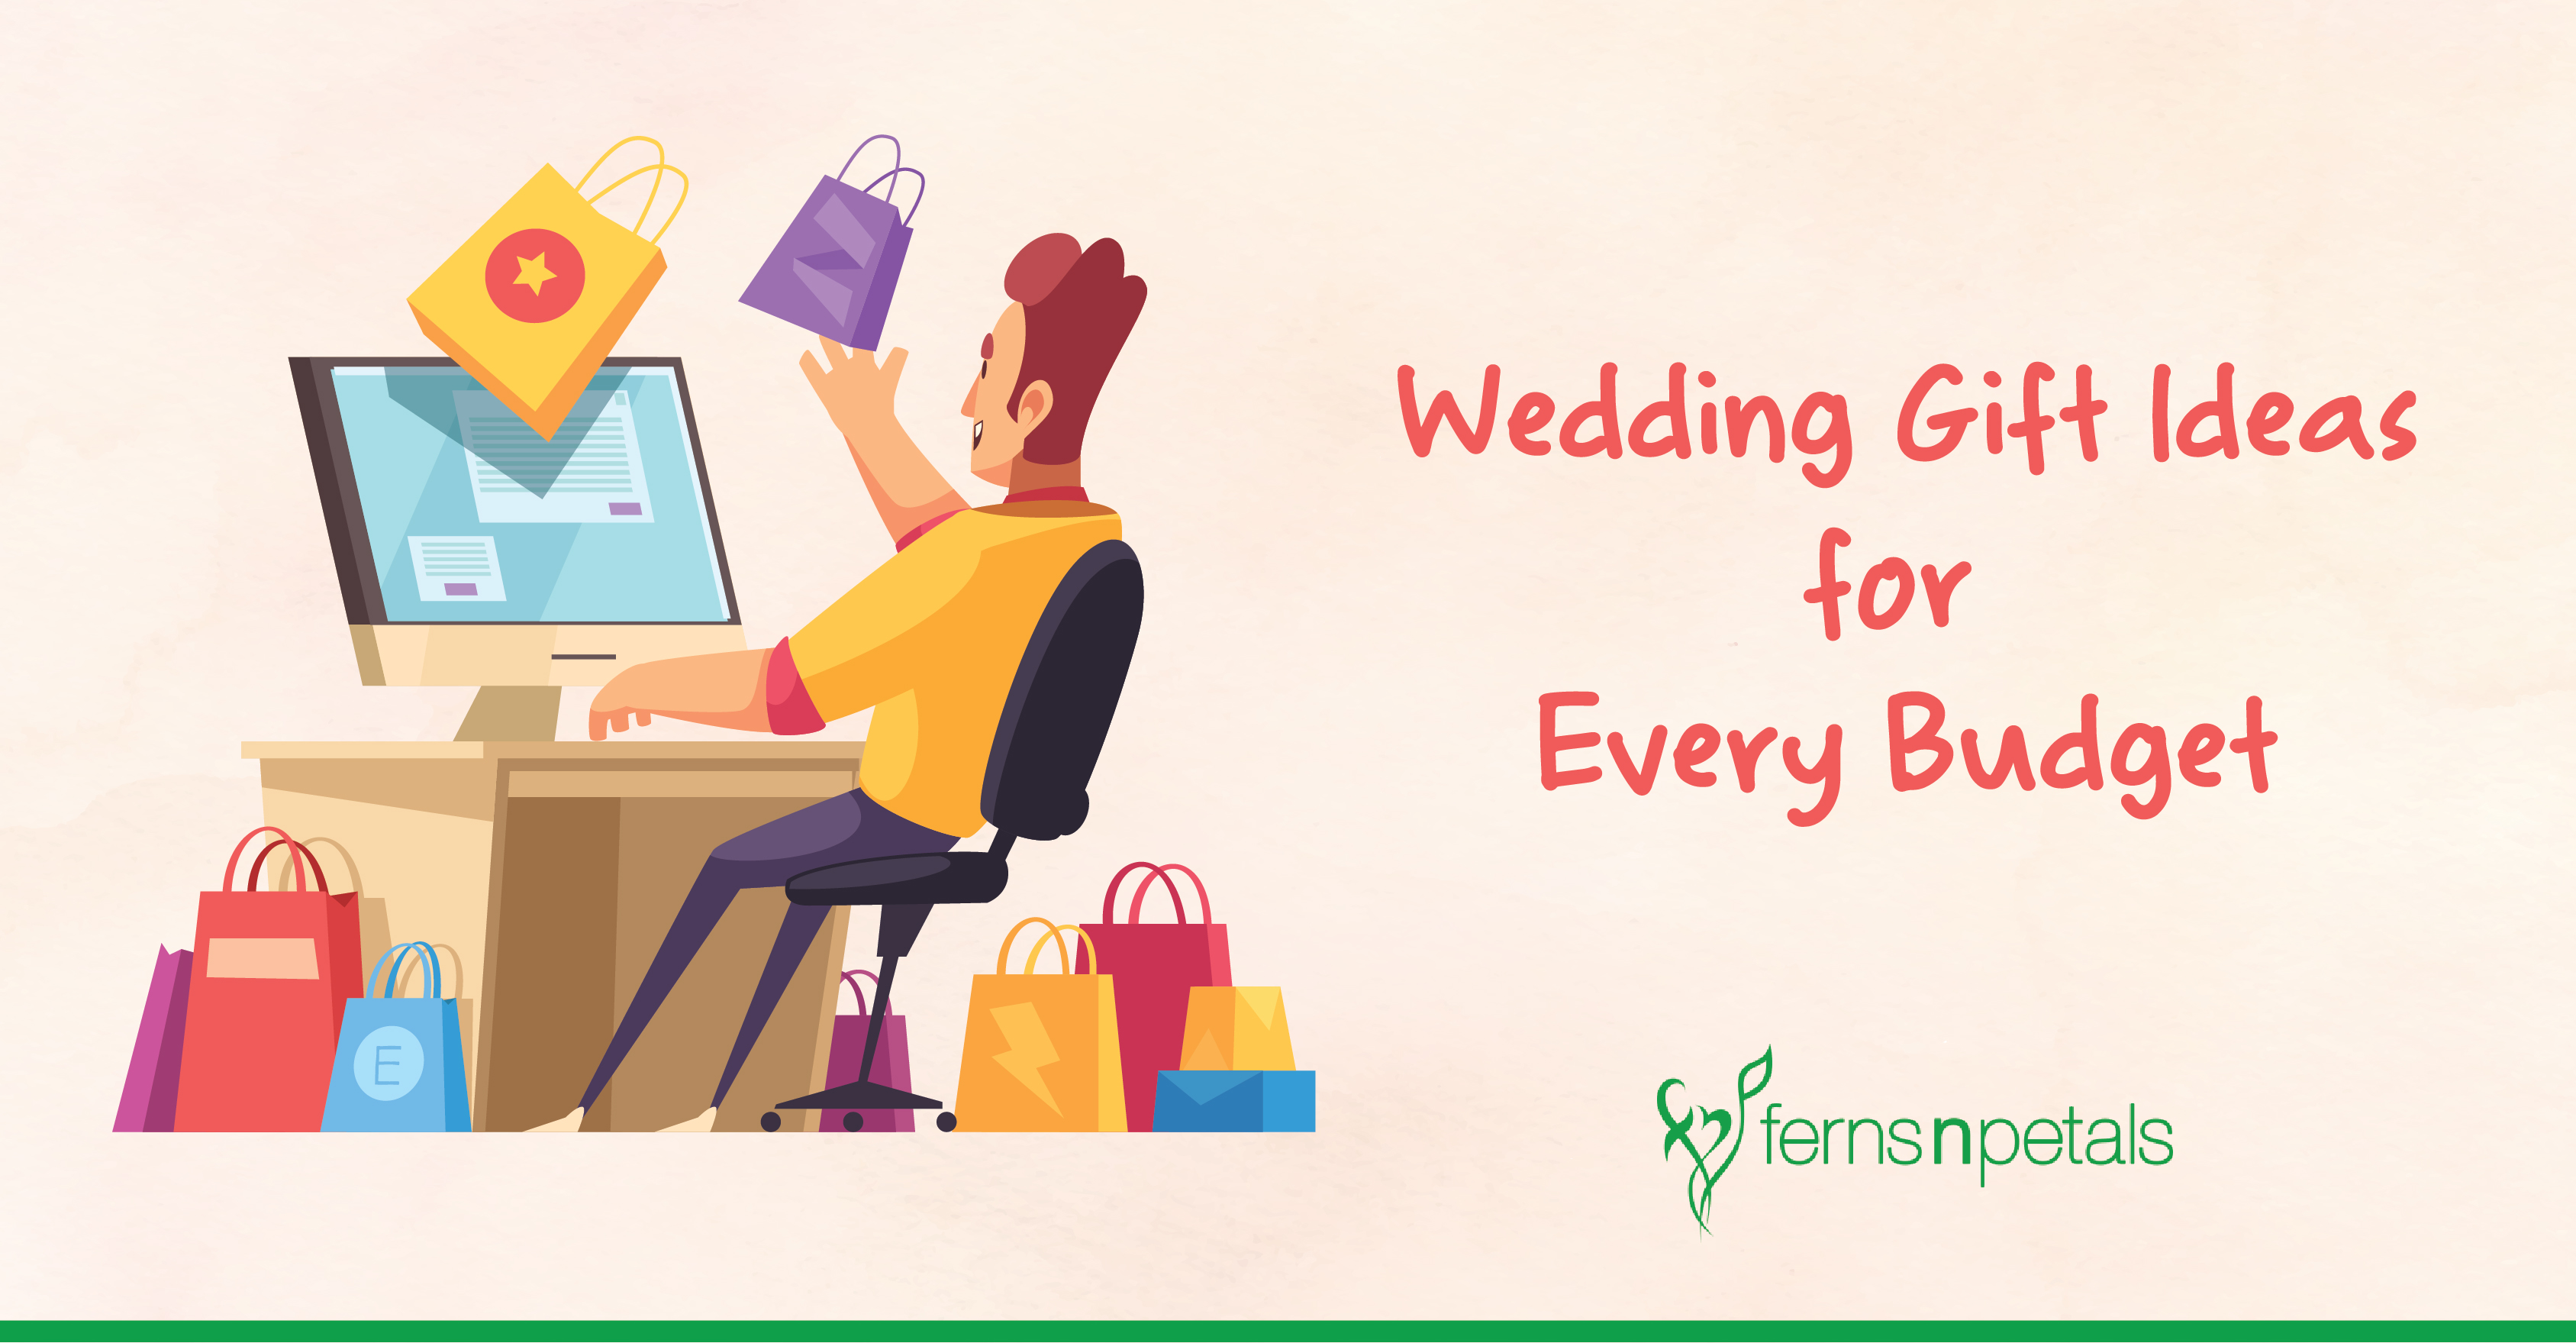 The 10 Best Wedding Gifts Shops in Hyderabad - Weddingwire.in